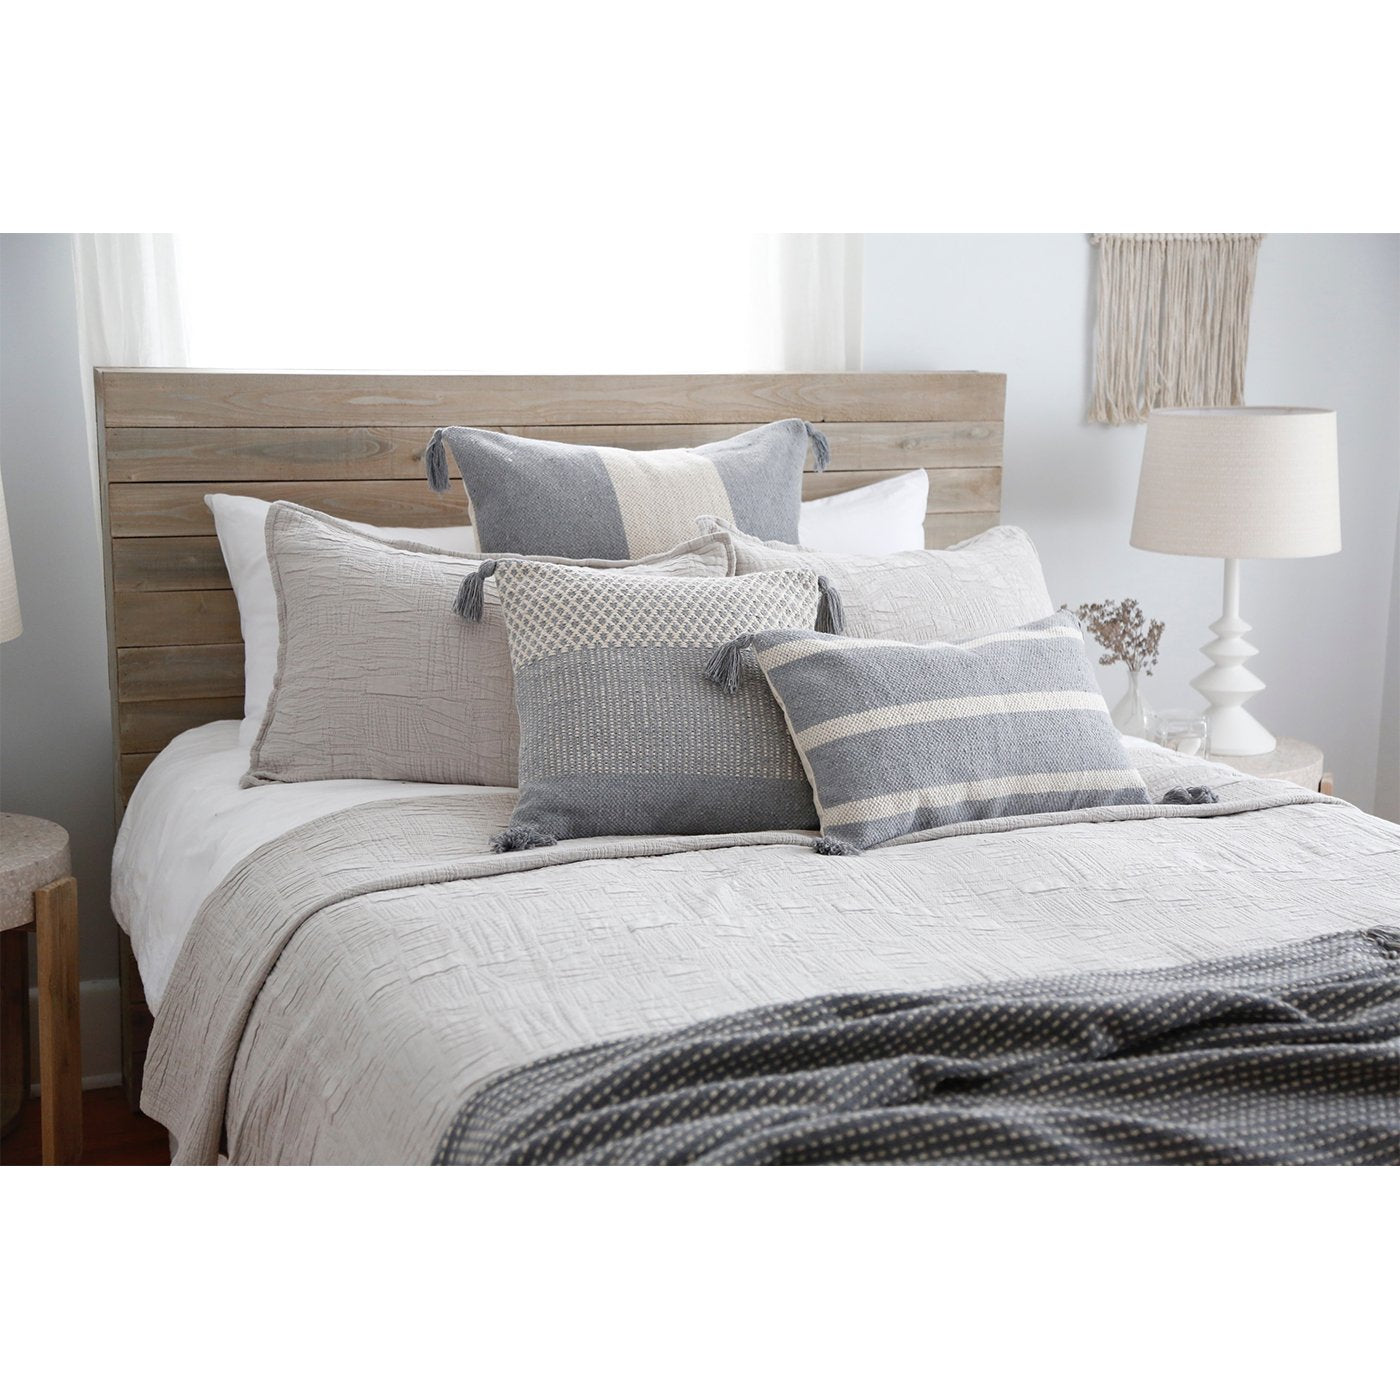 Harbour Matelasse Collection - Taupe-Pom Pom at Home